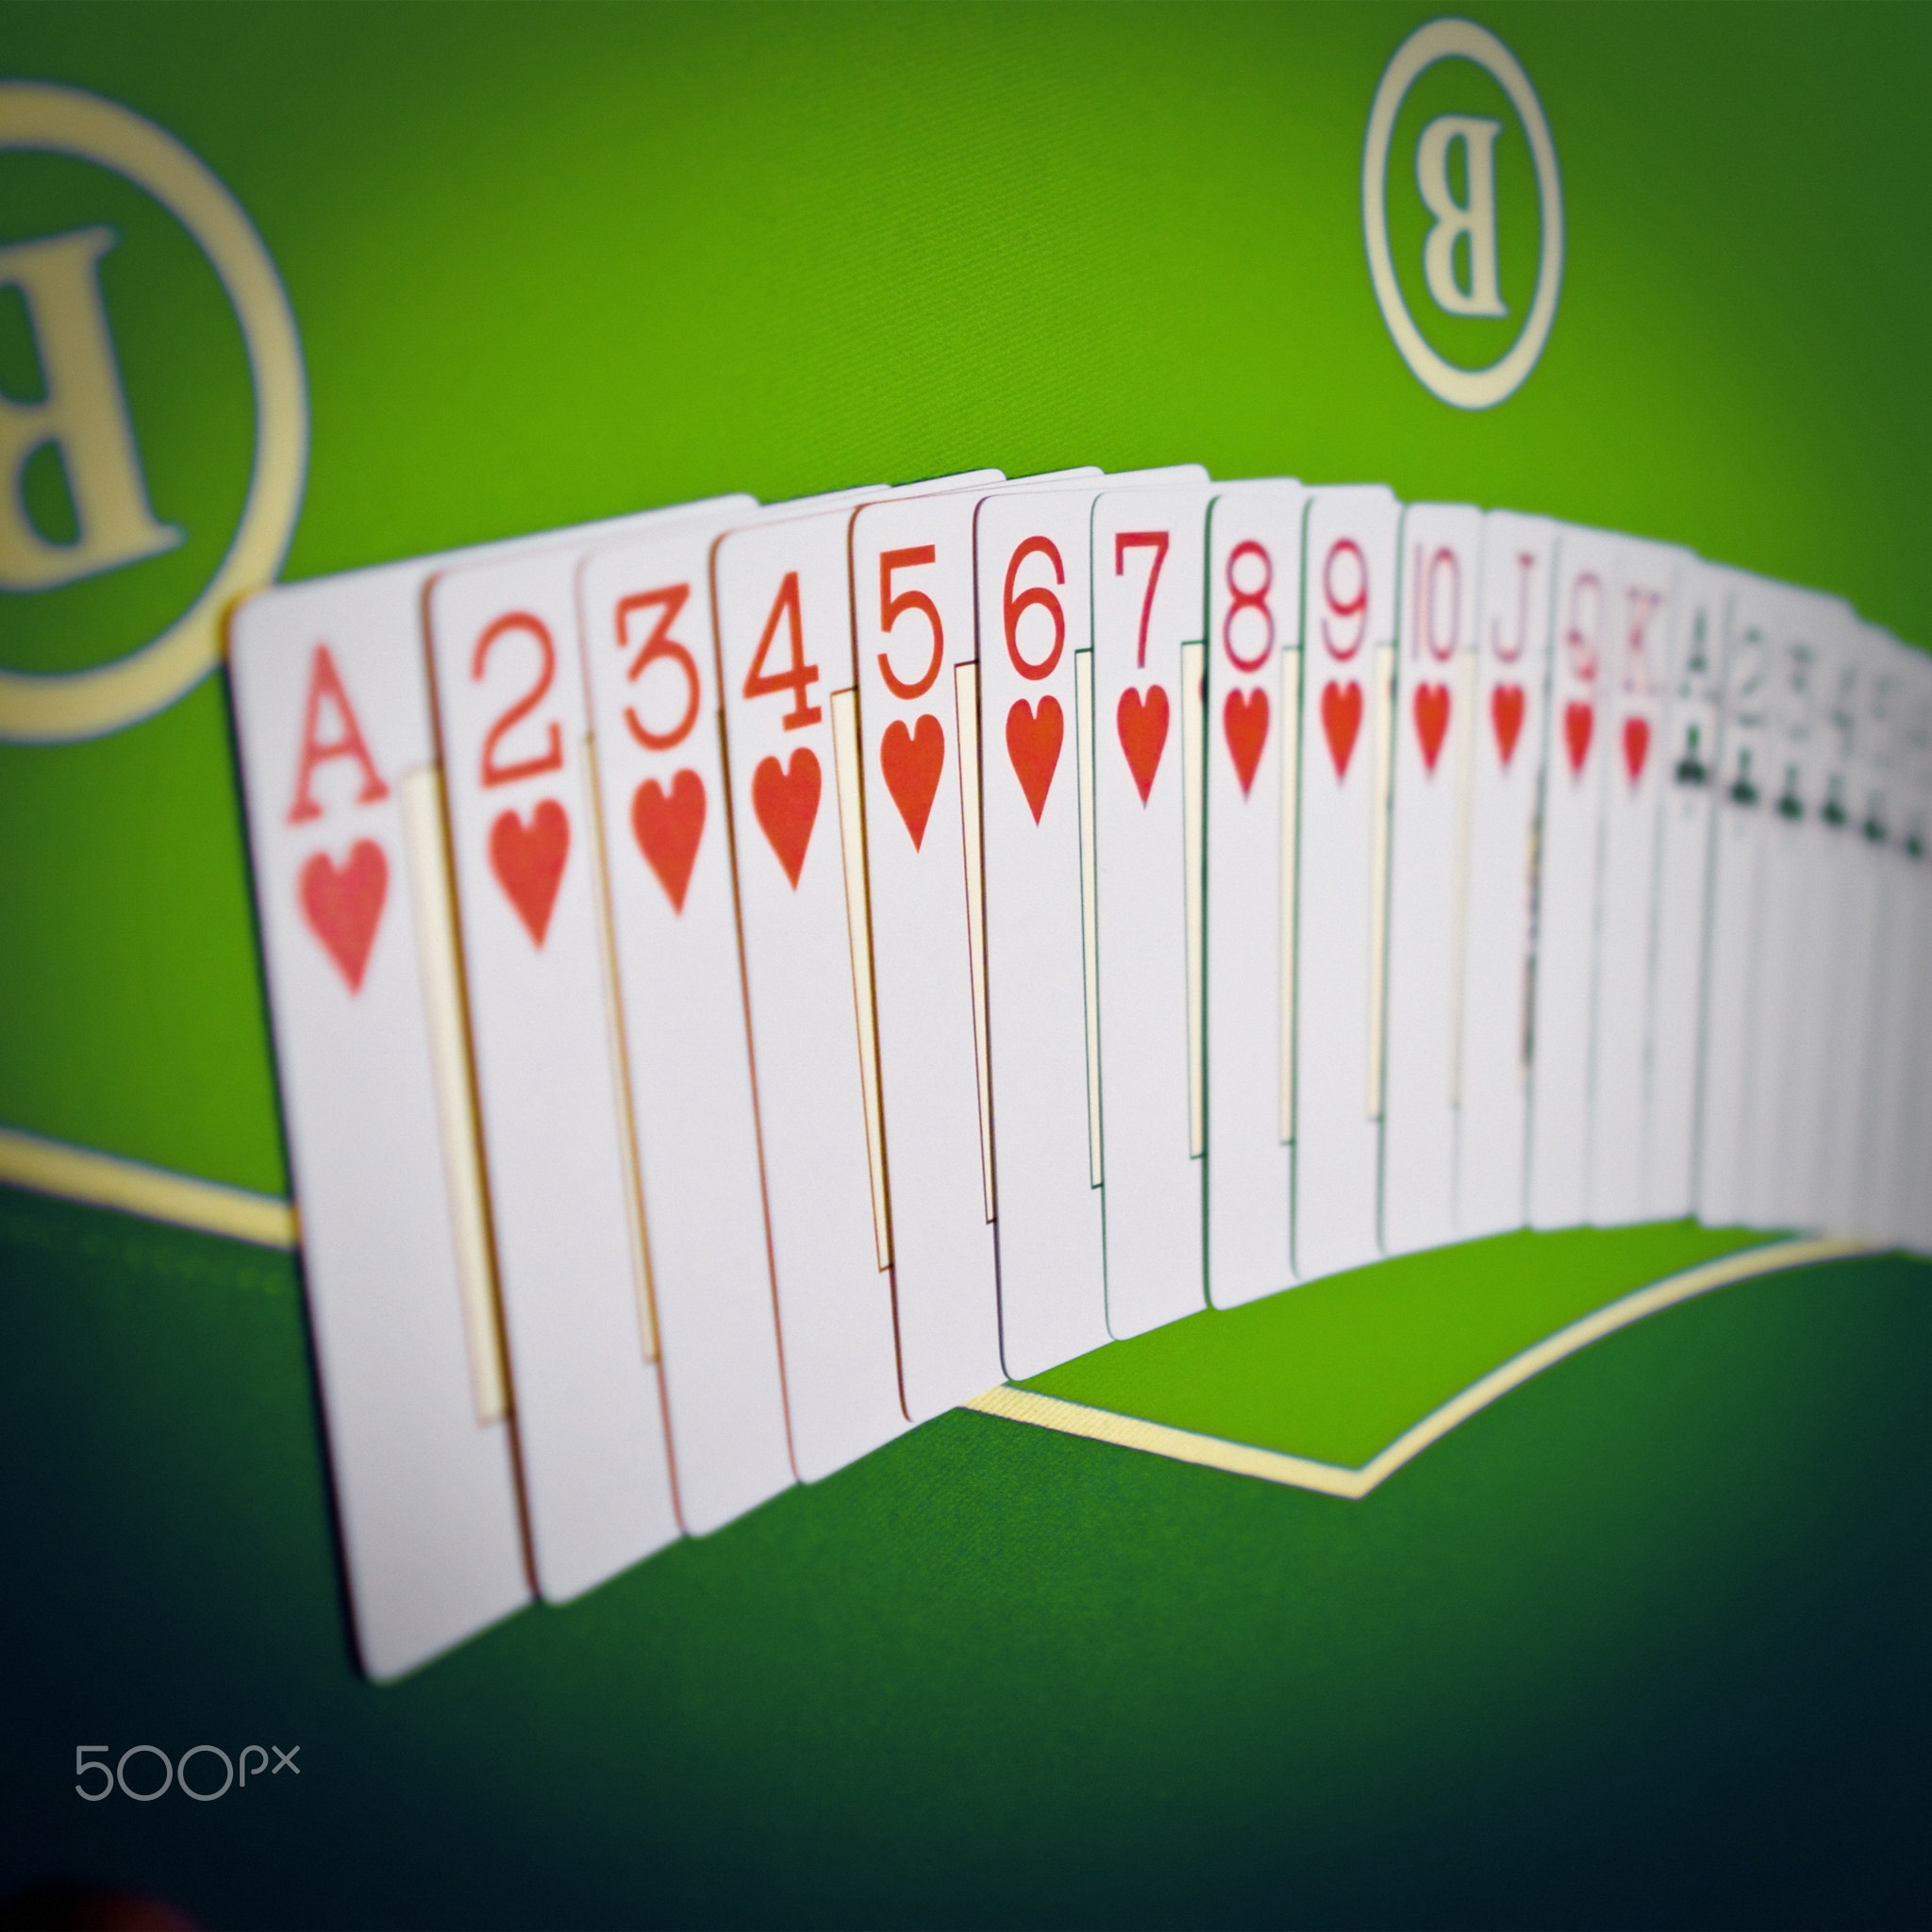 Playing cards game in casino, gambling ad